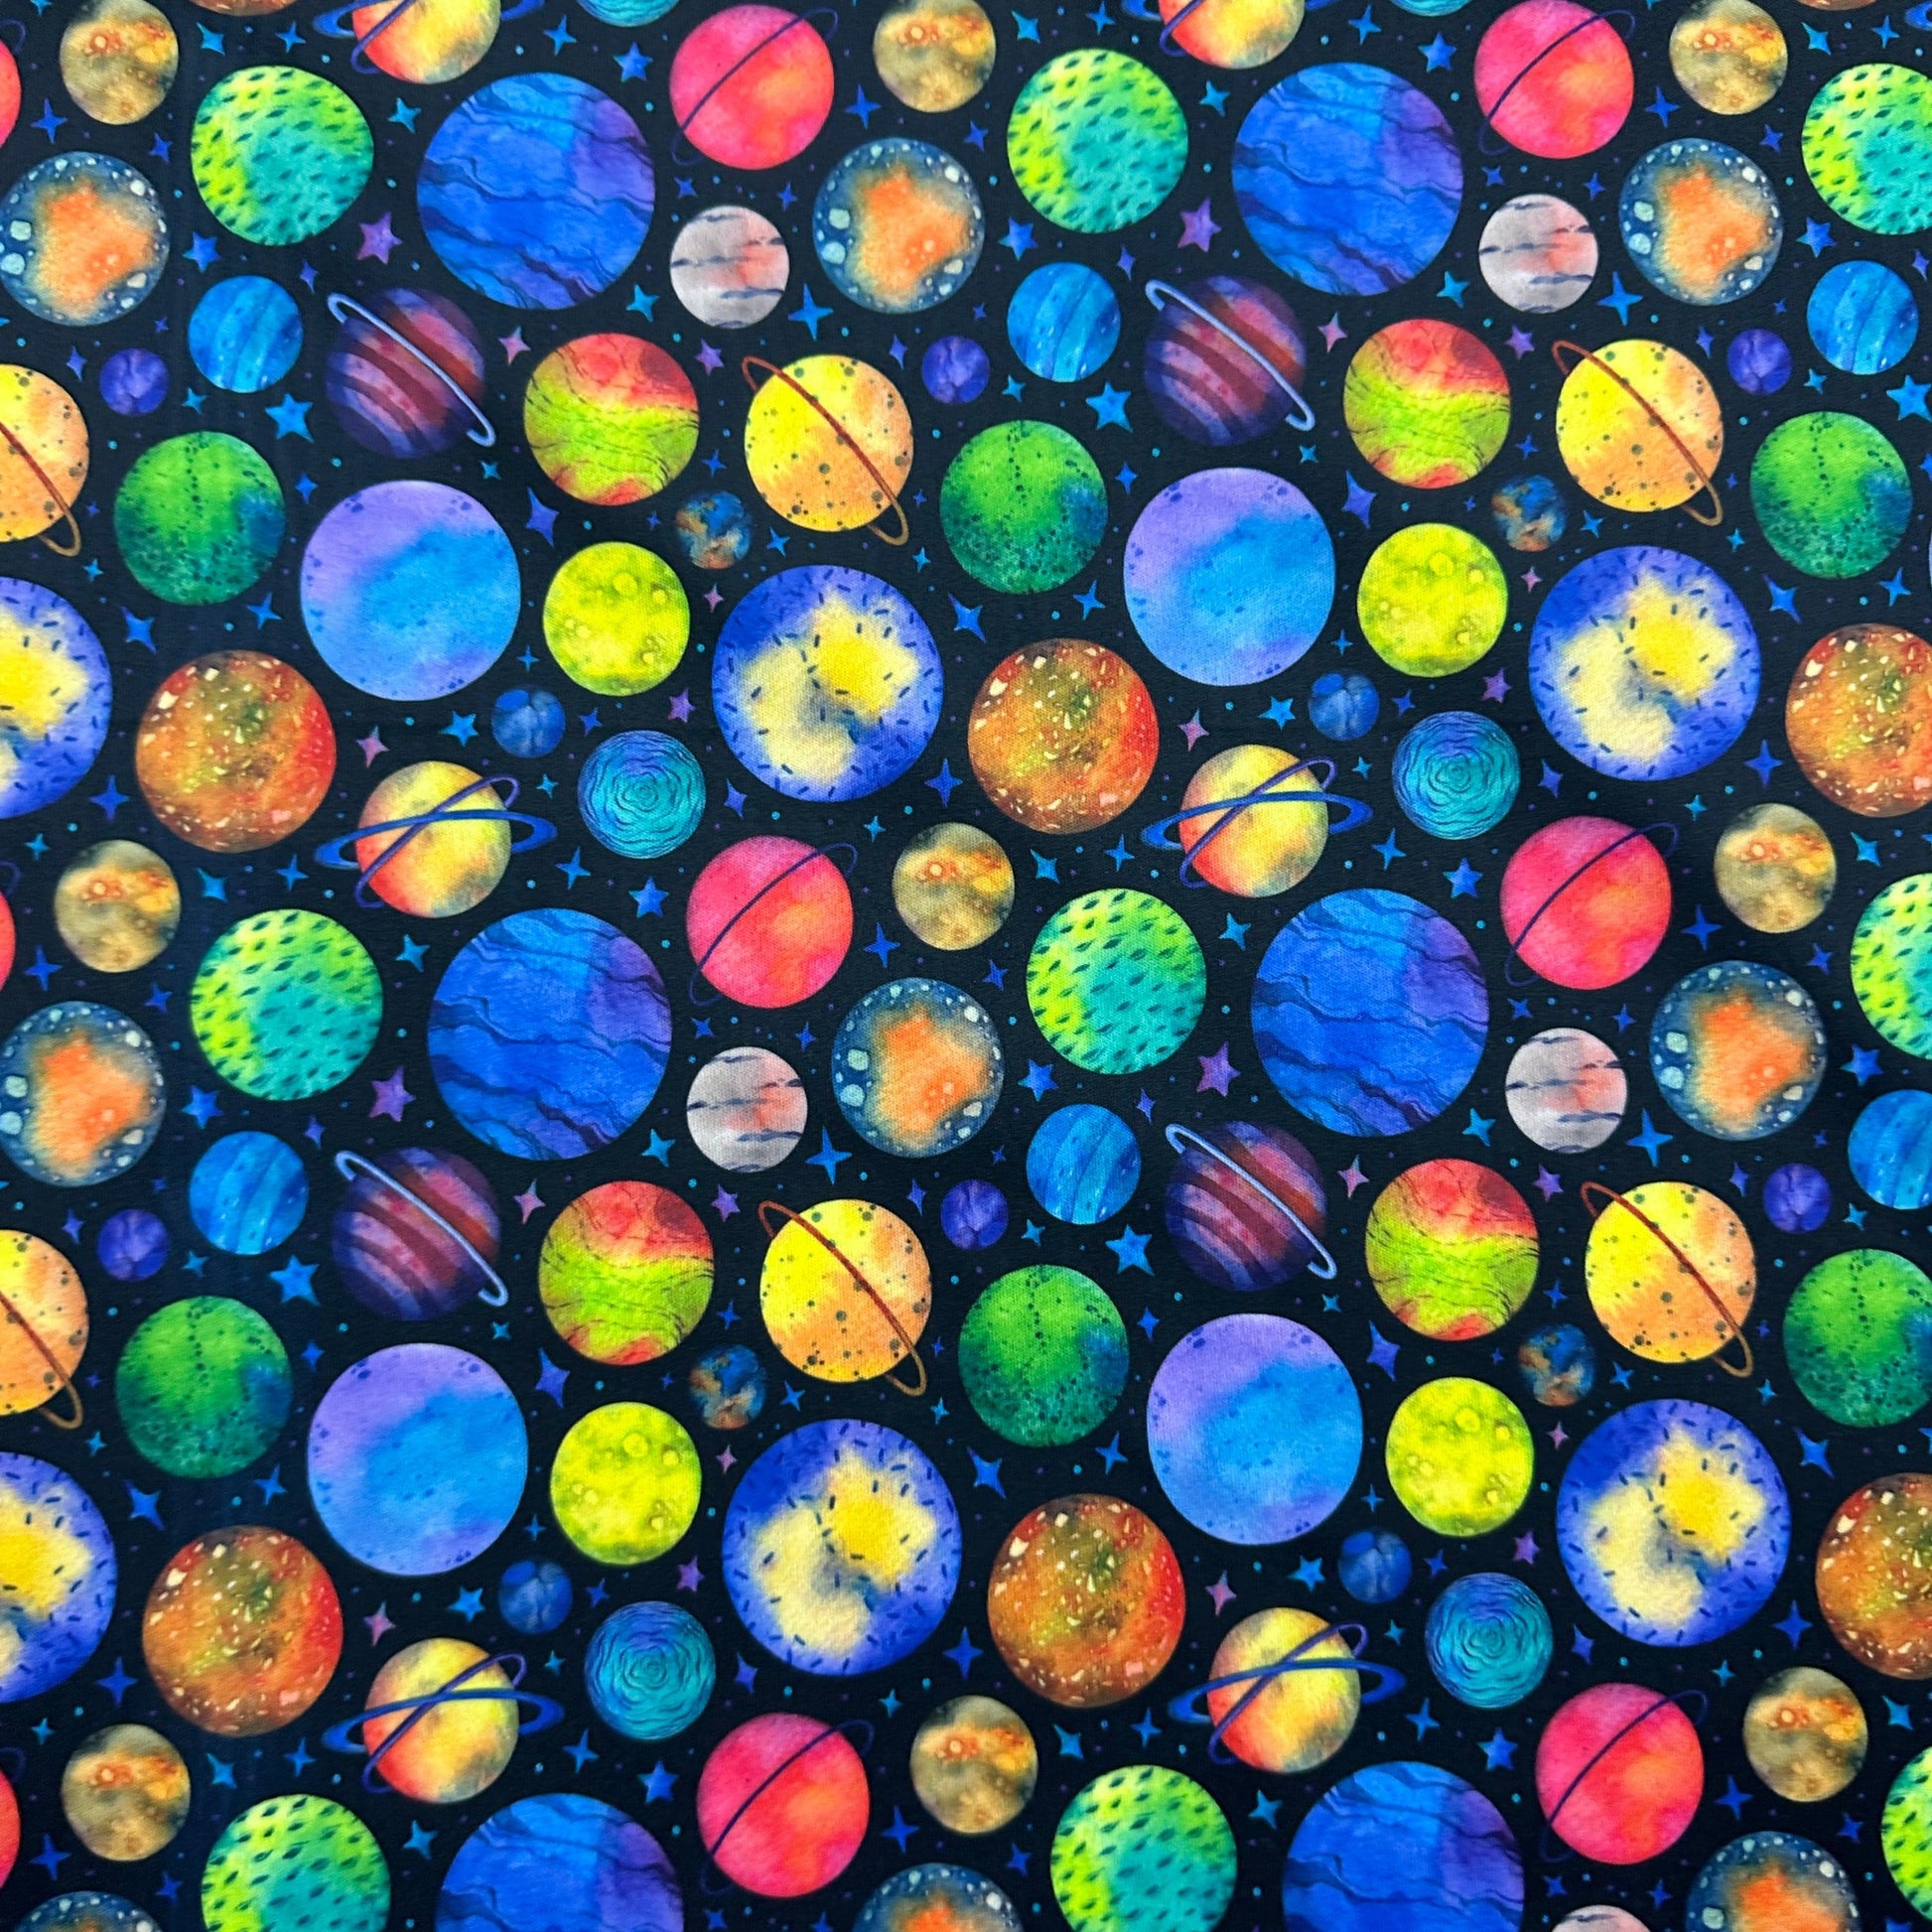 Rainbow Planets on Black 1 mil PUL Fabric - Made in the USA - Nature's Fabrics